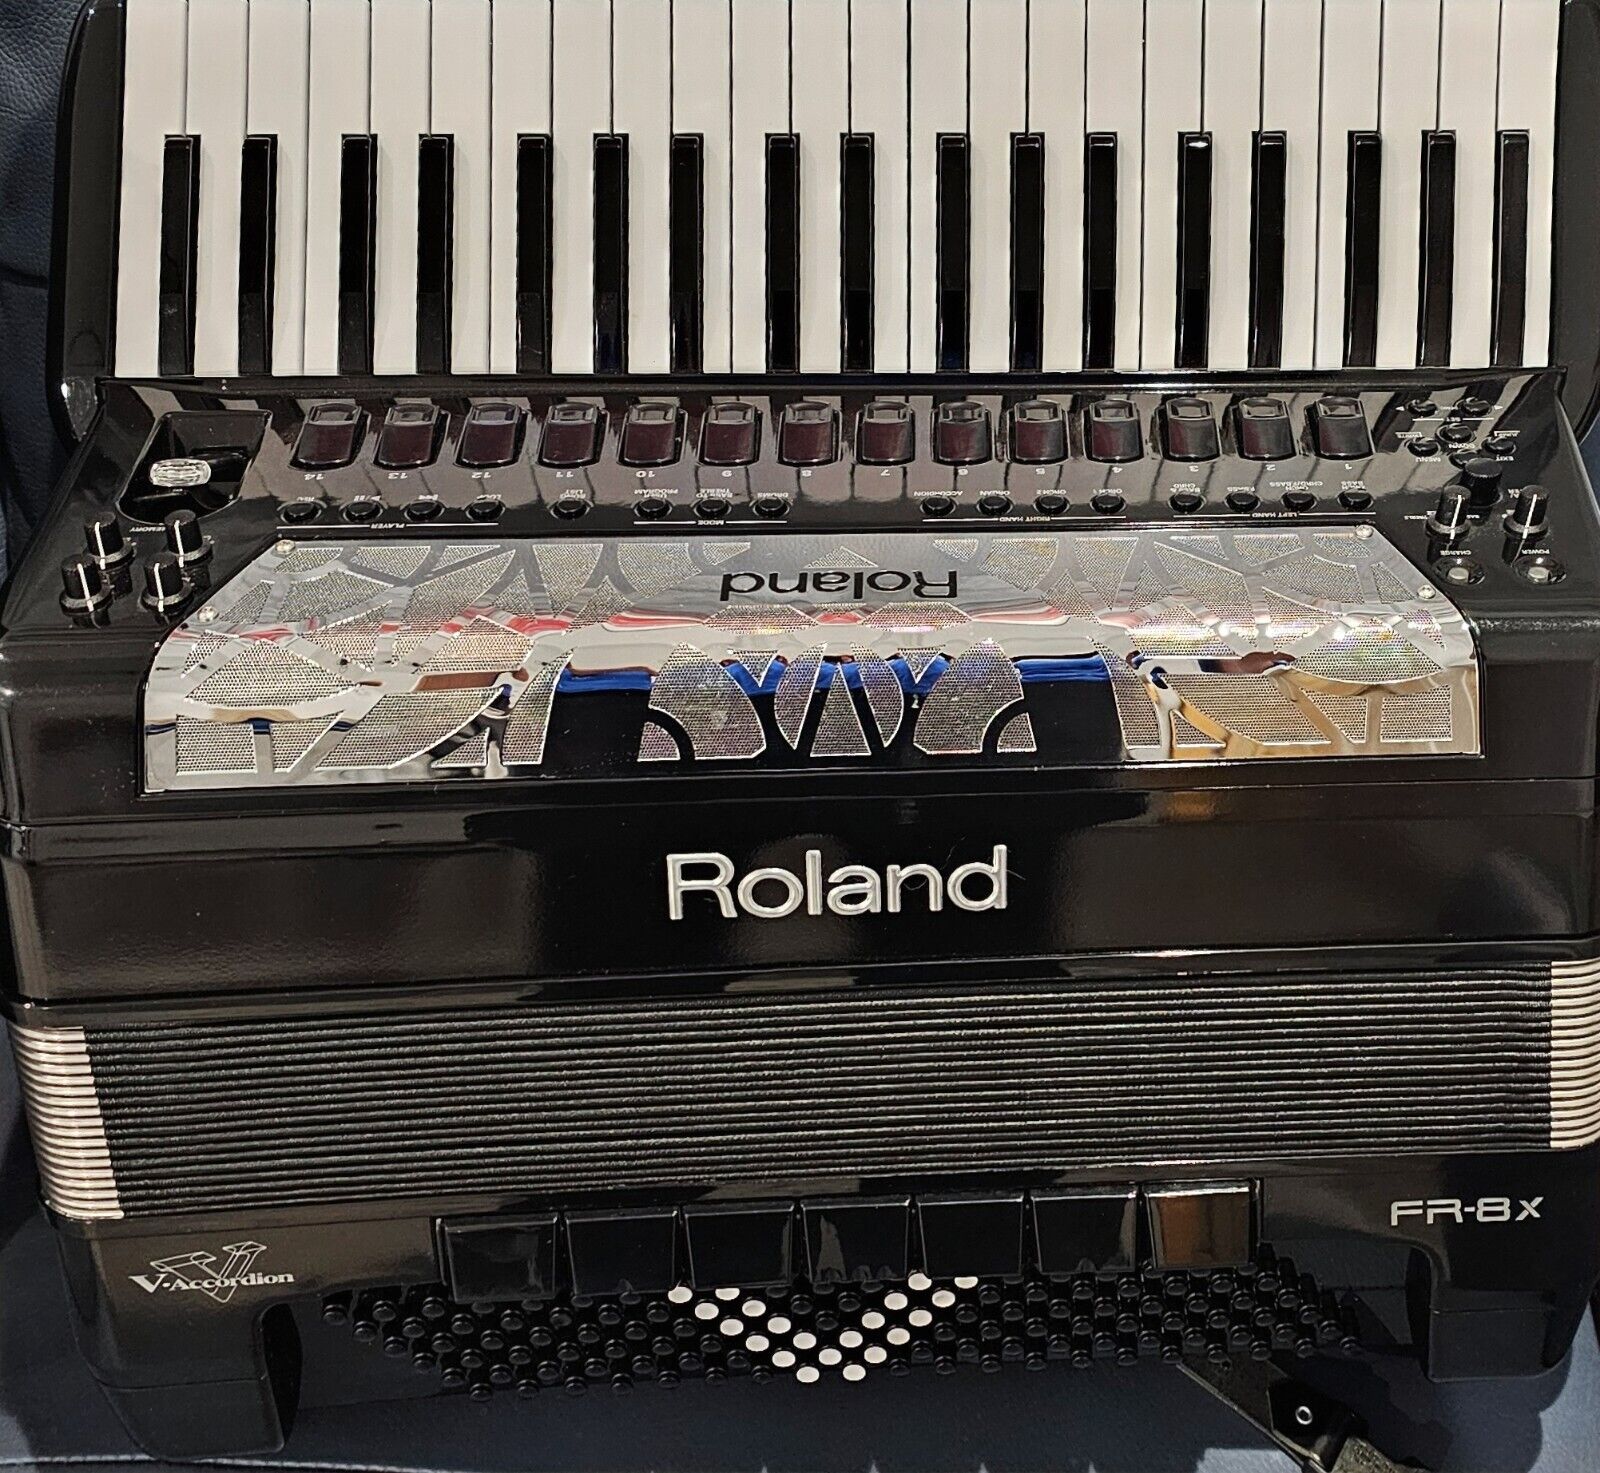 Roland FR-8X  V accordion  model Black Excellent Condition with extra sound set